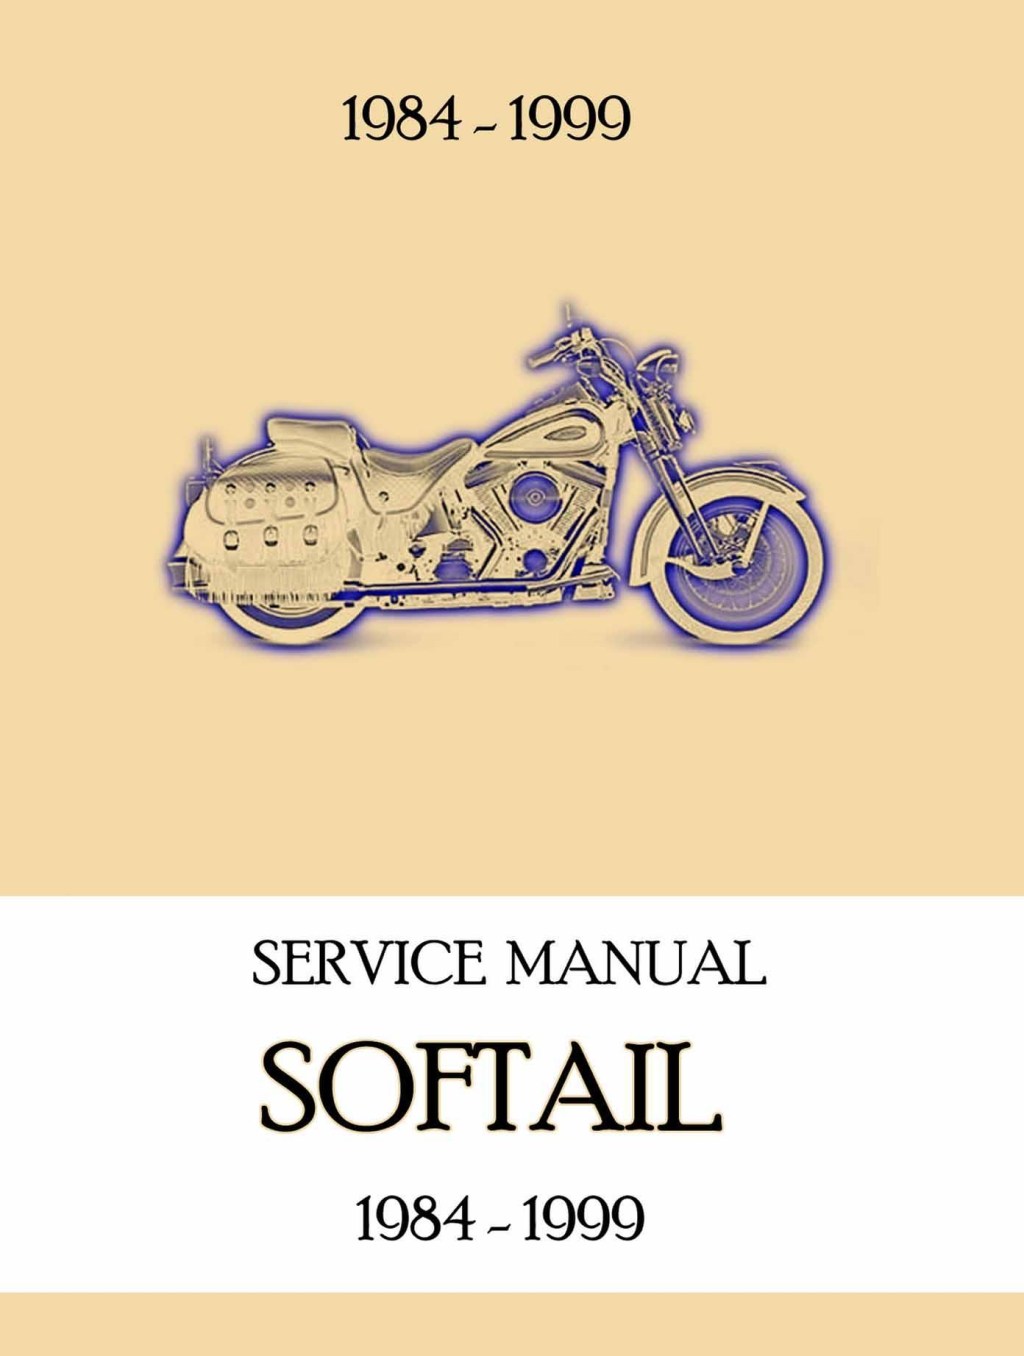 Picture of: HARLEY DAVIDSON SOFTAIL Service Repair Manual by kmdisiodok